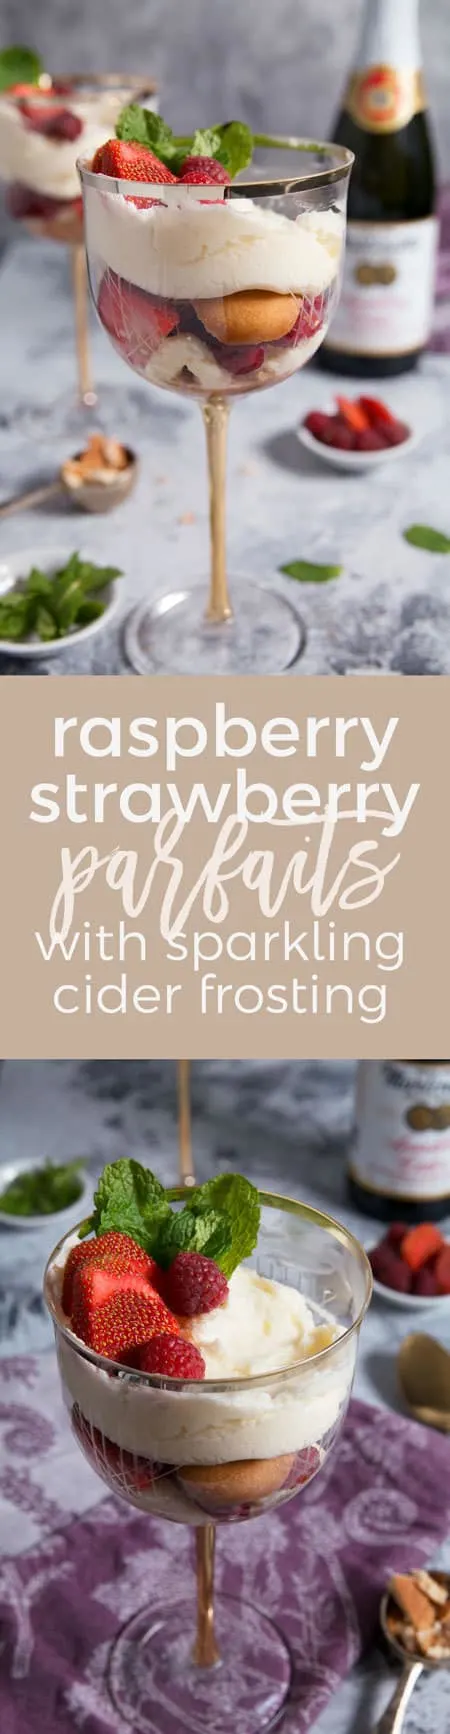 Raspberry Strawberry Parfaits with Sparkling Cider Frosting pin